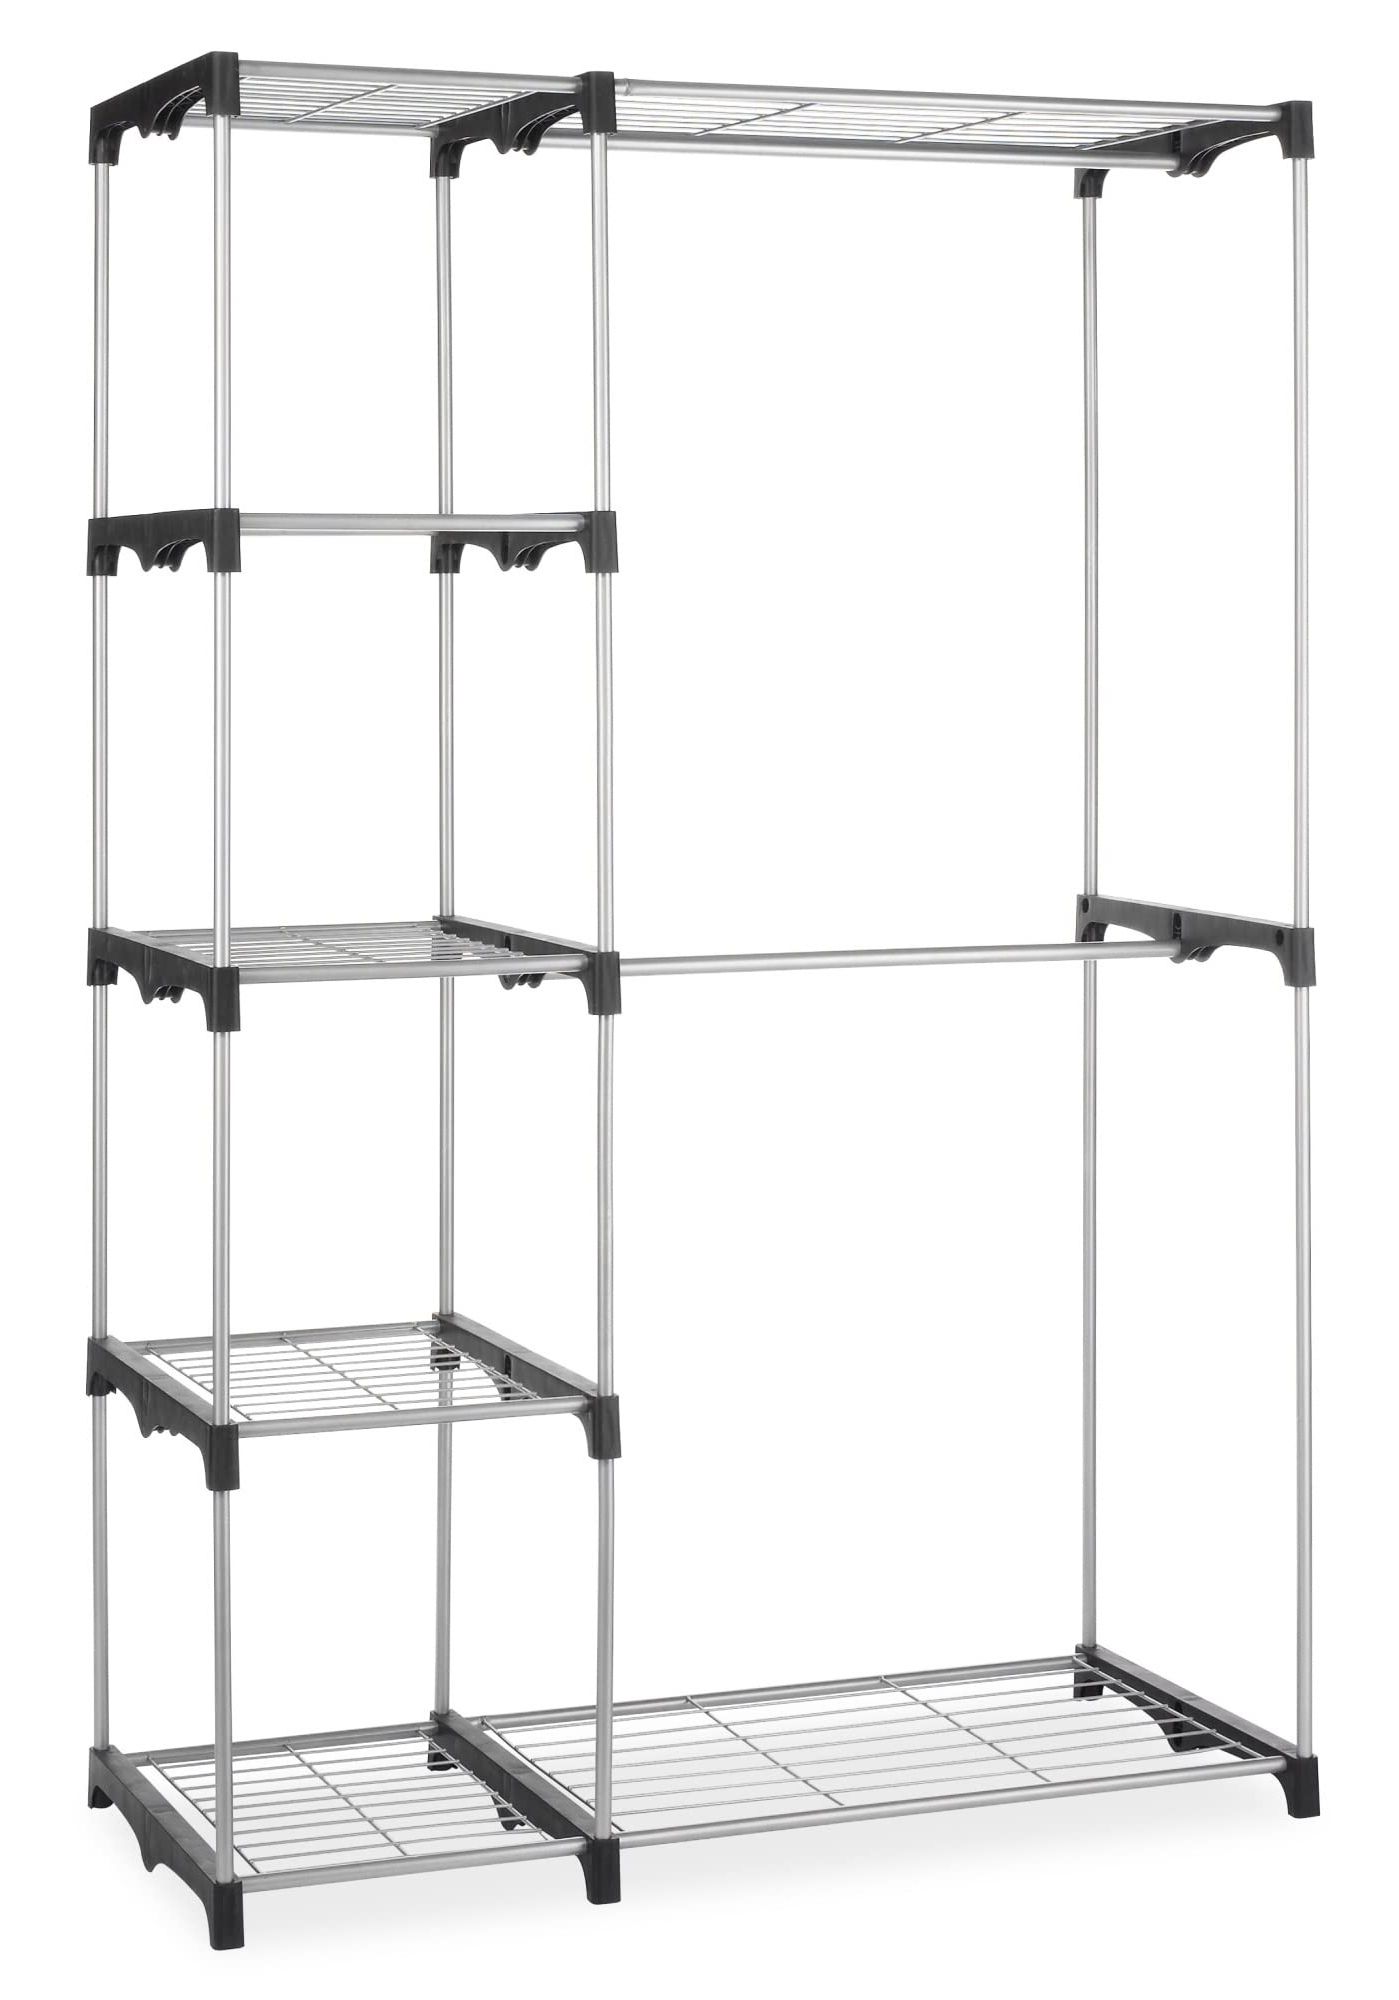 Most Popular Silver Metal Wardrobes Throughout Amazon: Fashionable And Practical Dual Pole Metal Wardrobe System With  High Strength Resin Connectors And Silver Black Color Scheme, Providing  Ultimate Storage Solution : Home & Kitchen (View 9 of 10)